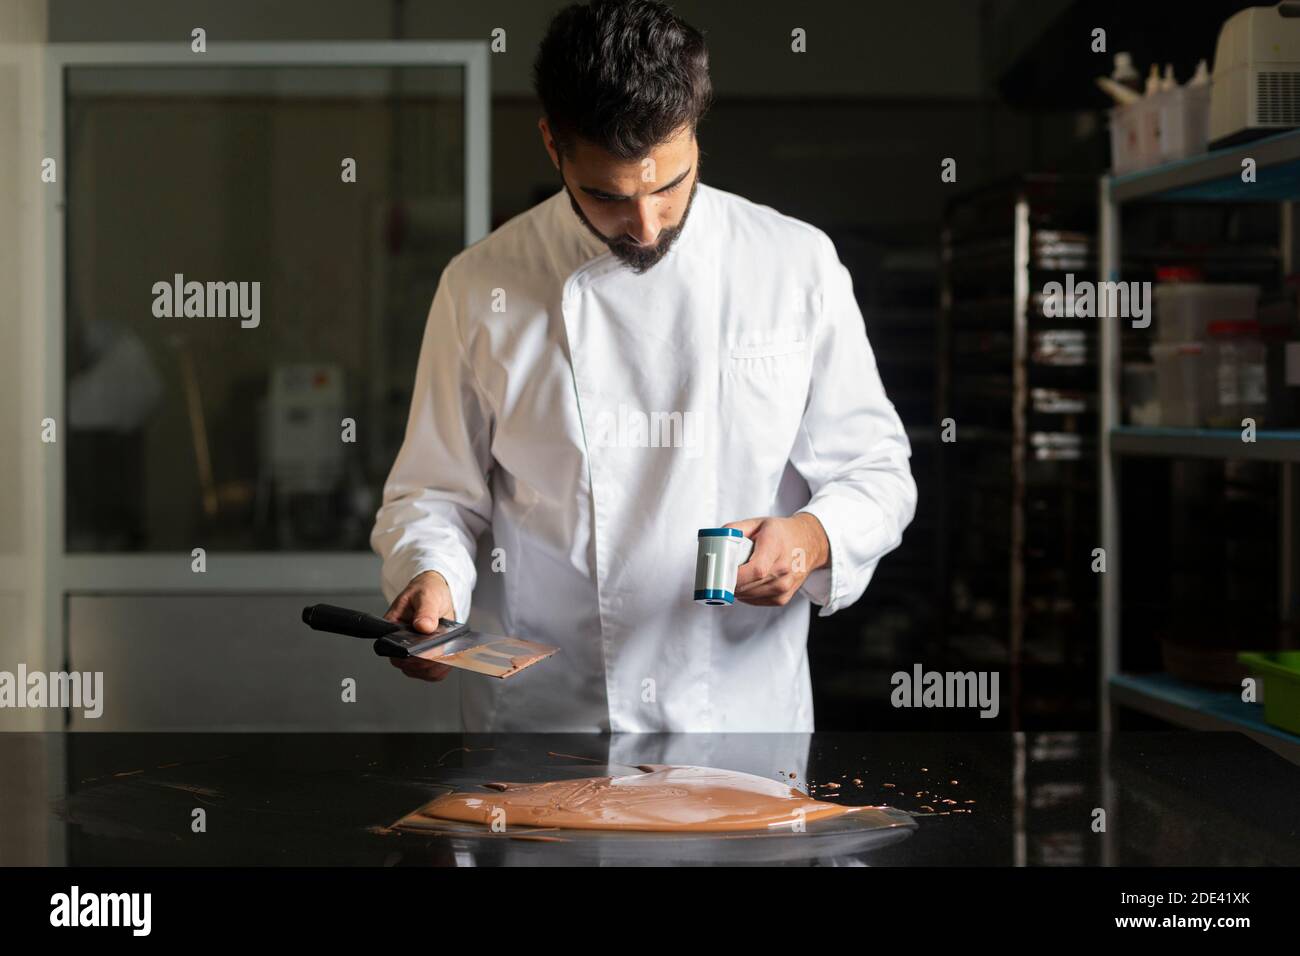 https://c8.alamy.com/comp/2DE41XK/pastry-chef-measuring-the-temperature-of-the-chocolate-with-an-infrared-thermometer-working-on-the-tempering-of-the-chocolate-2DE41XK.jpg